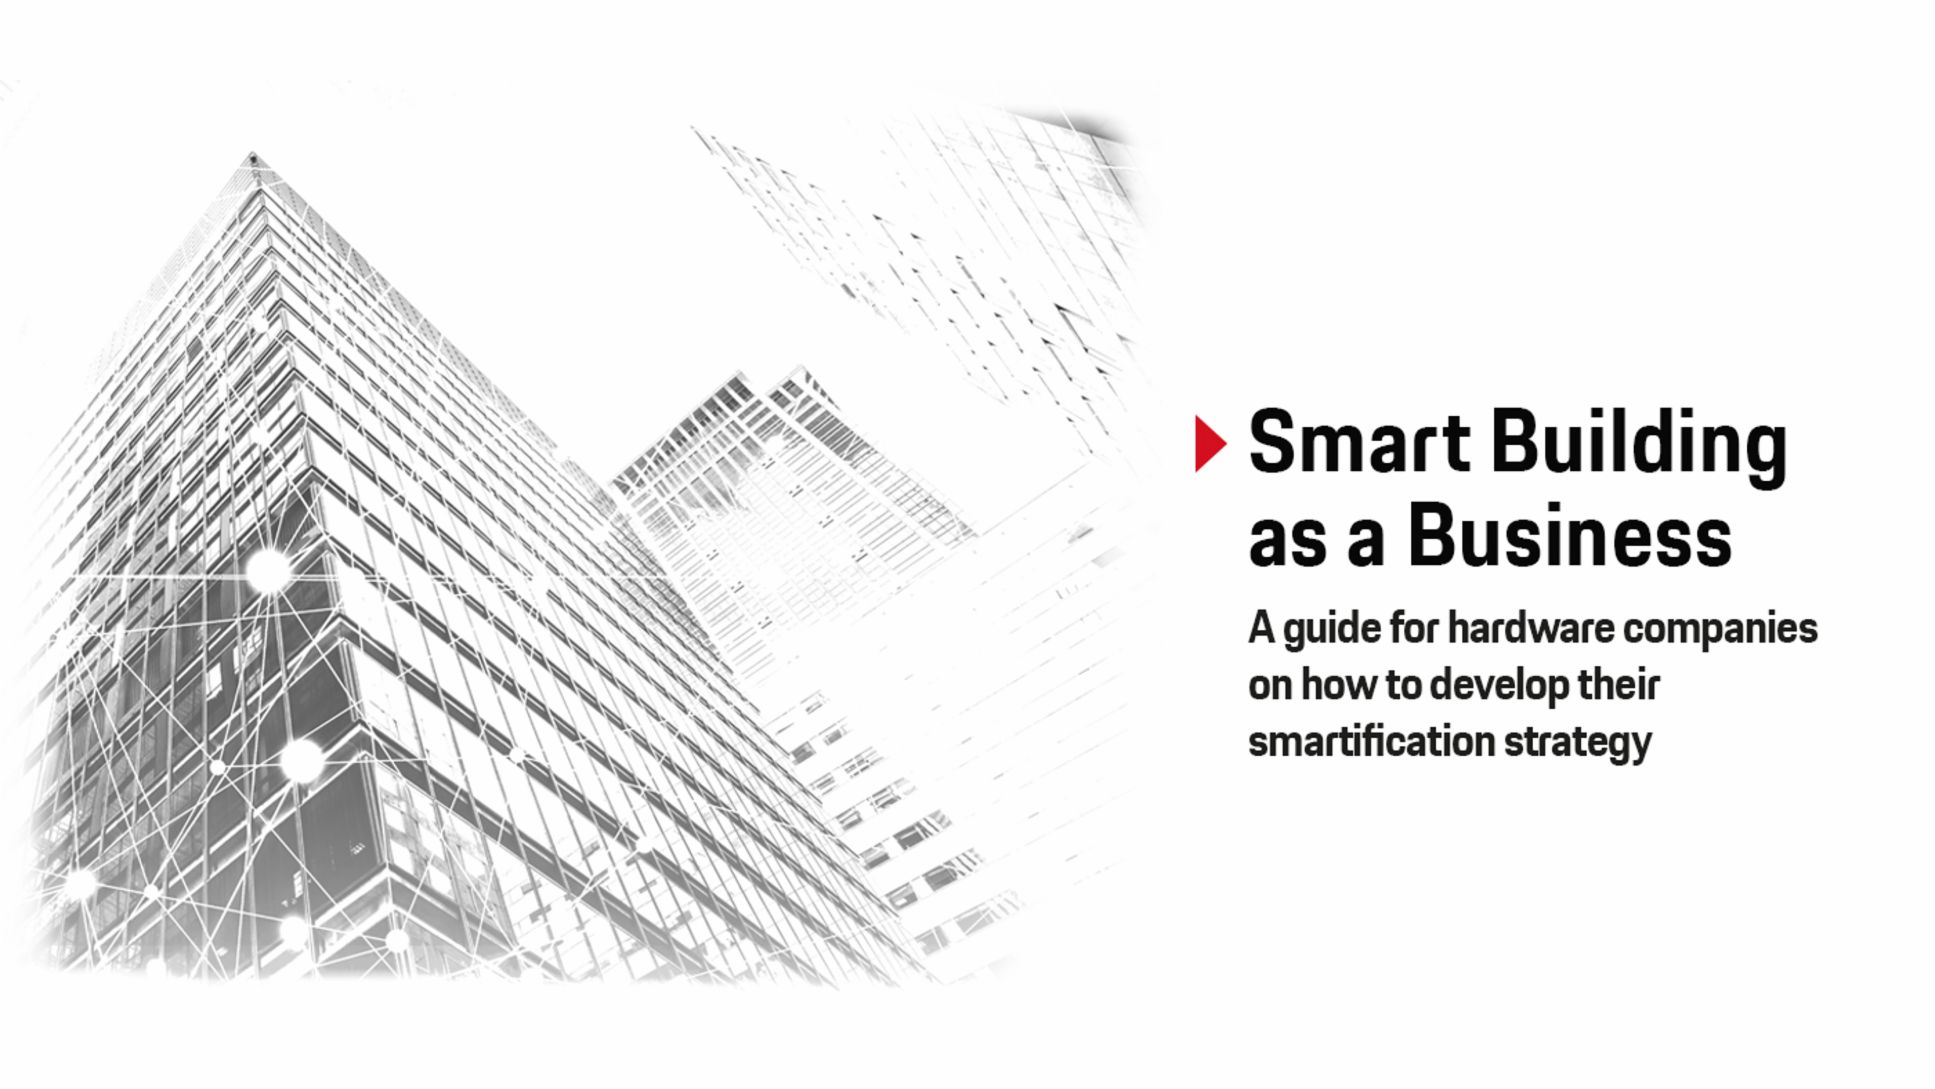 Smart Building as a Business, White Paper, 2019, Porsche Consulting GmbH